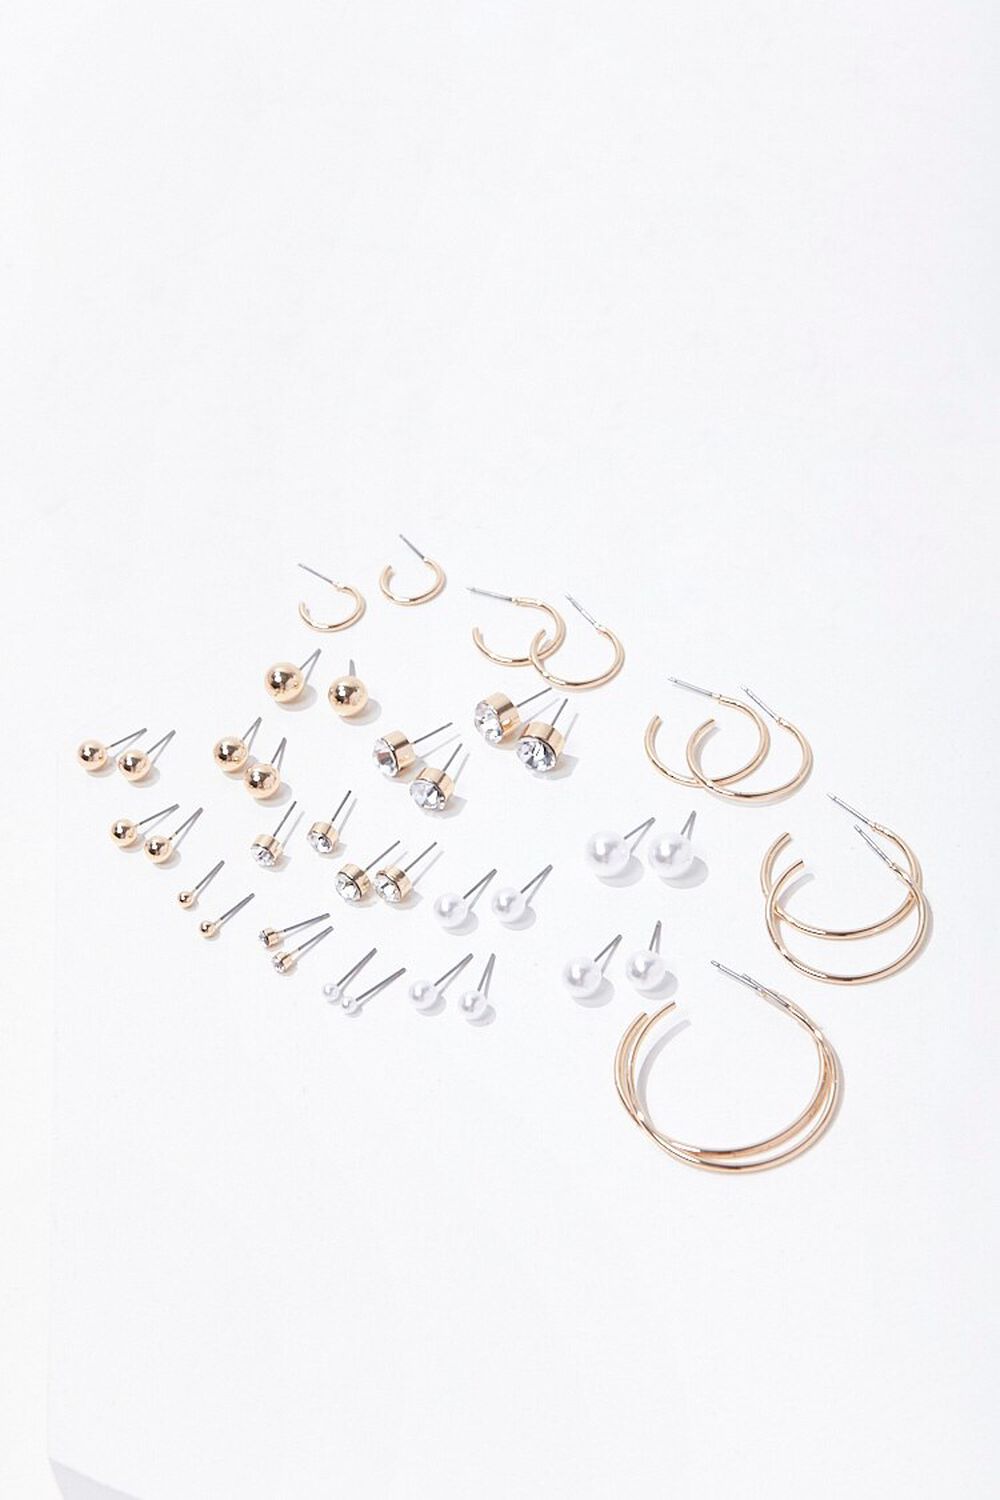 GOLD/CLEAR Assorted Earring Set, image 1